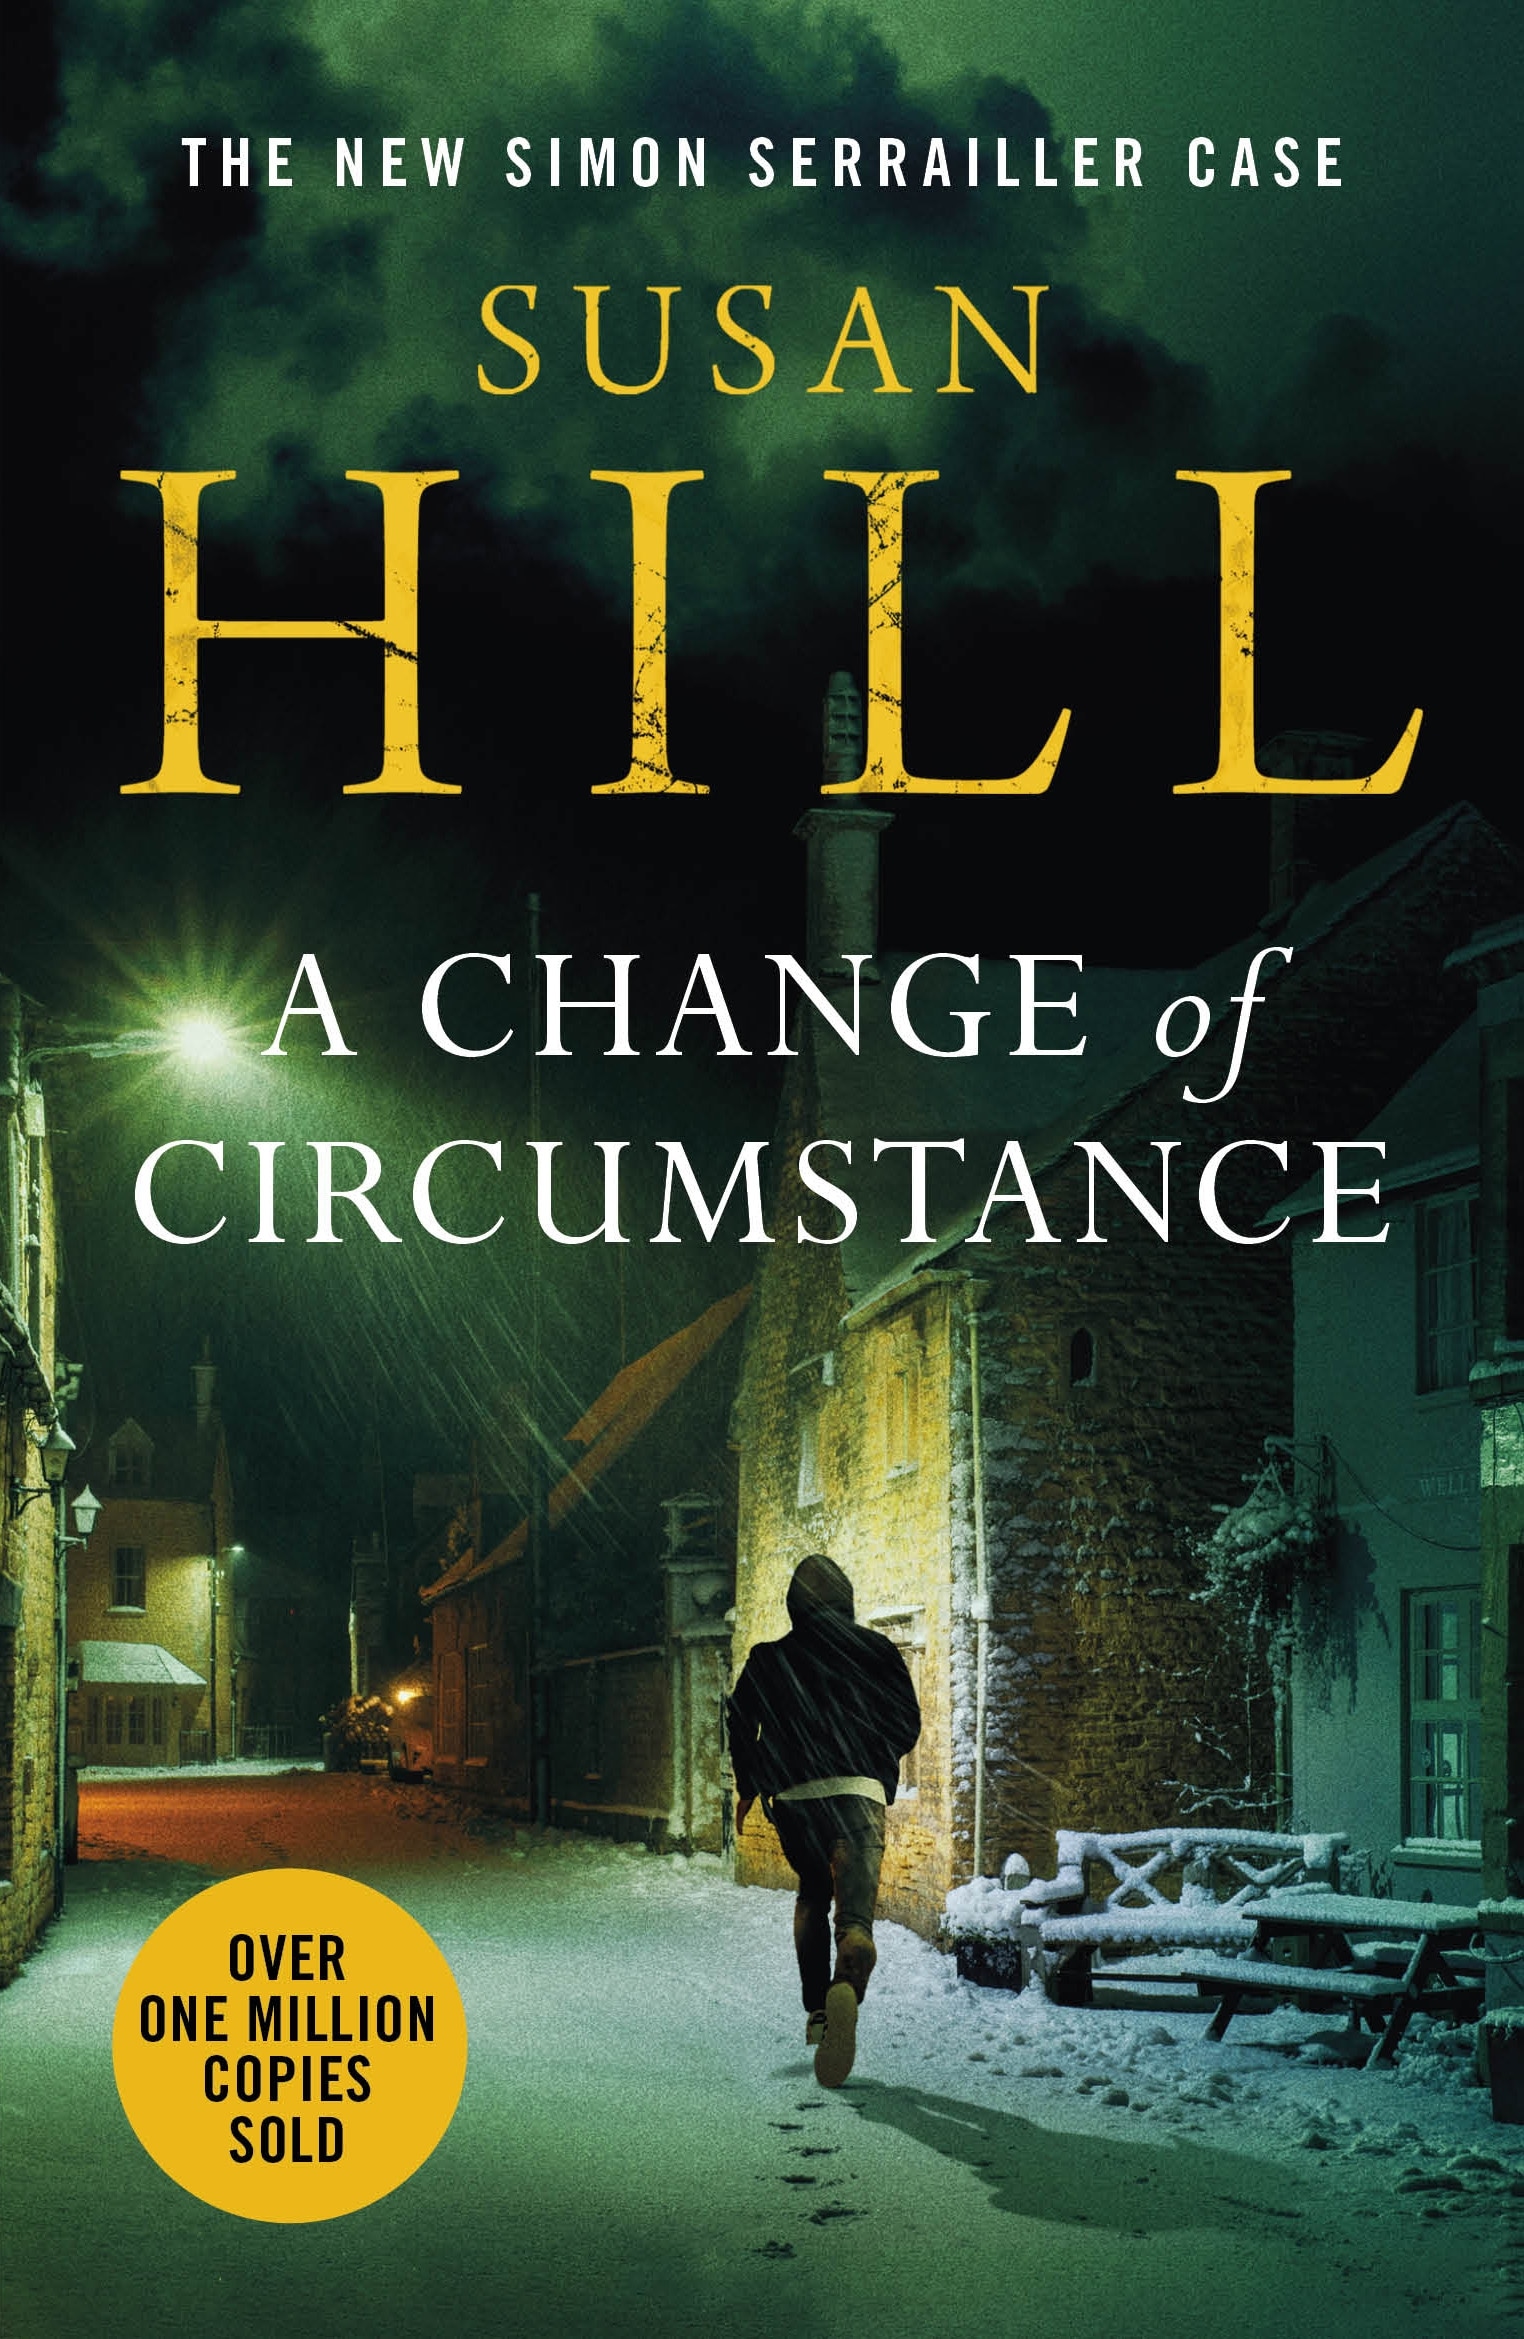 Book “A Change of Circumstance” by Susan Hill — August 4, 2022